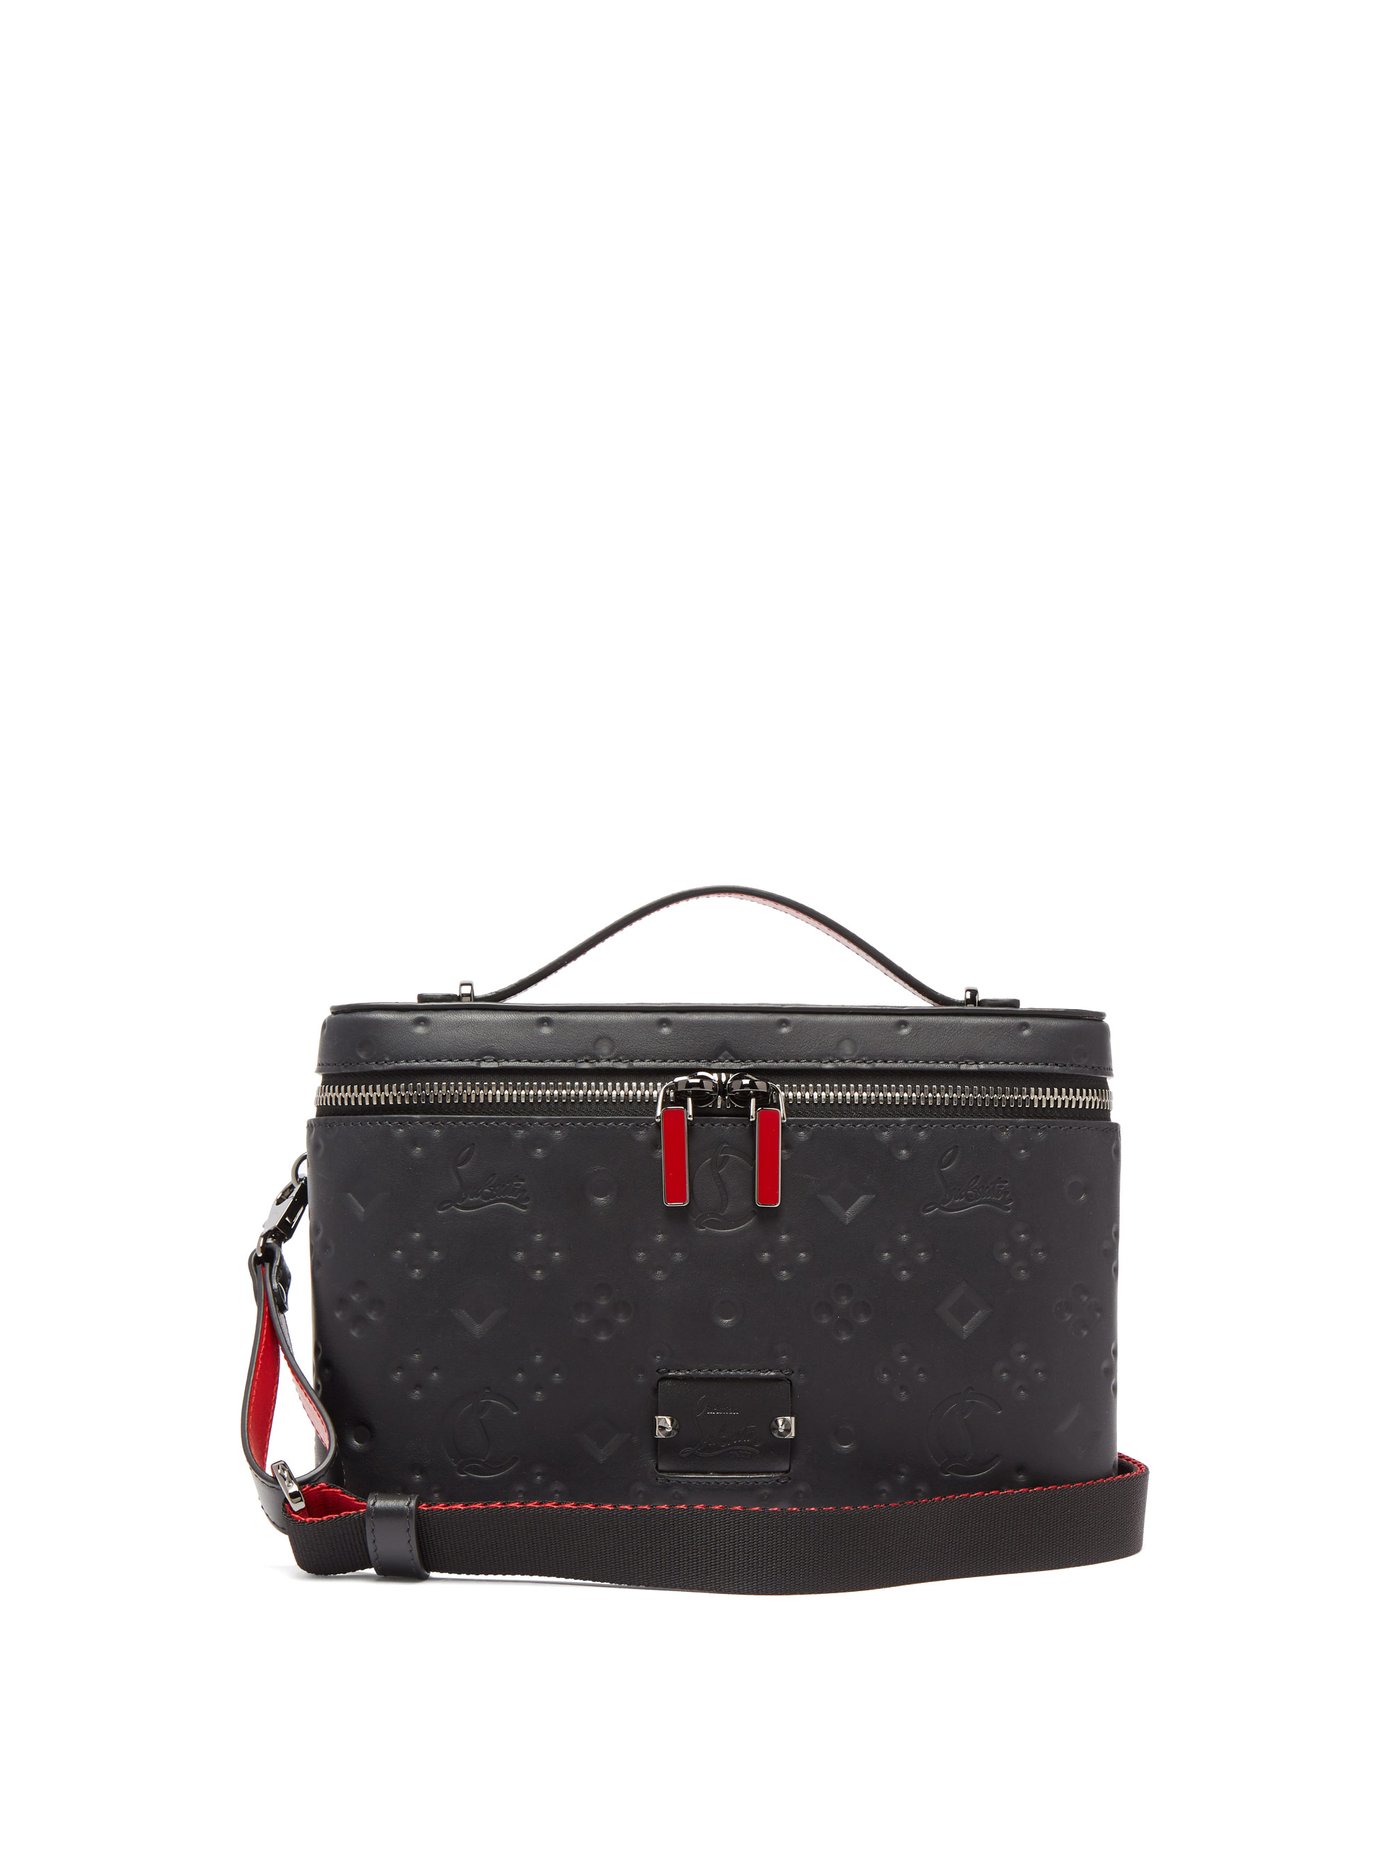 christian louboutin kypipouch